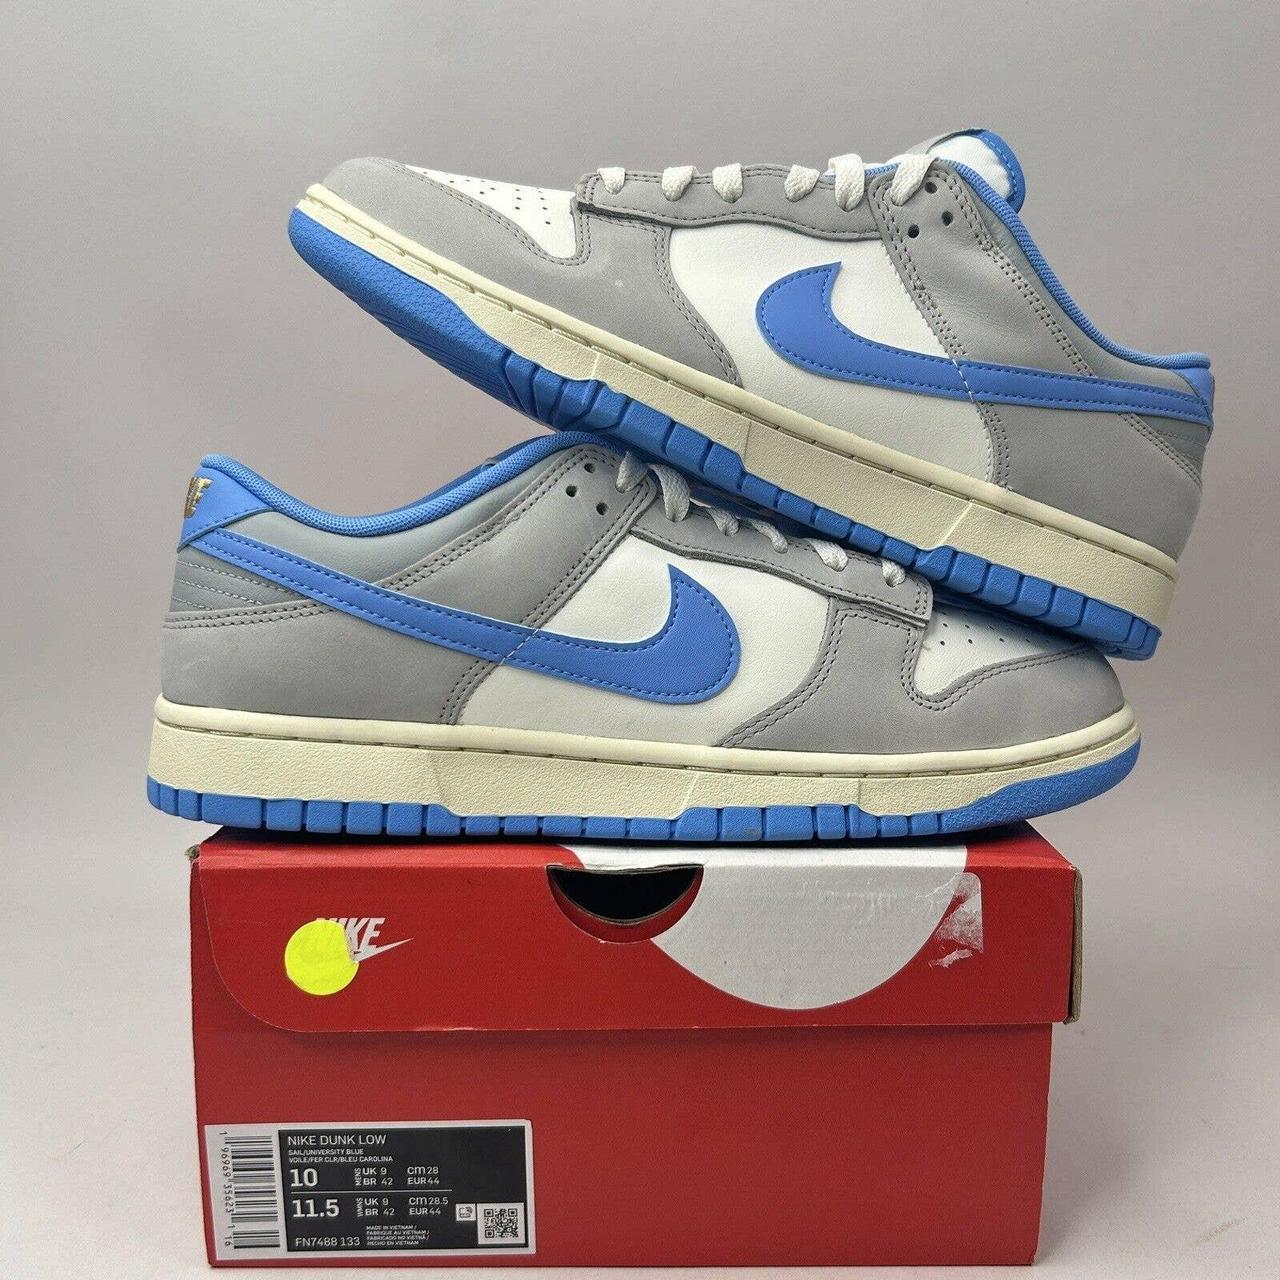 The Nike Dunk Low Athletic Department Sail University Blue